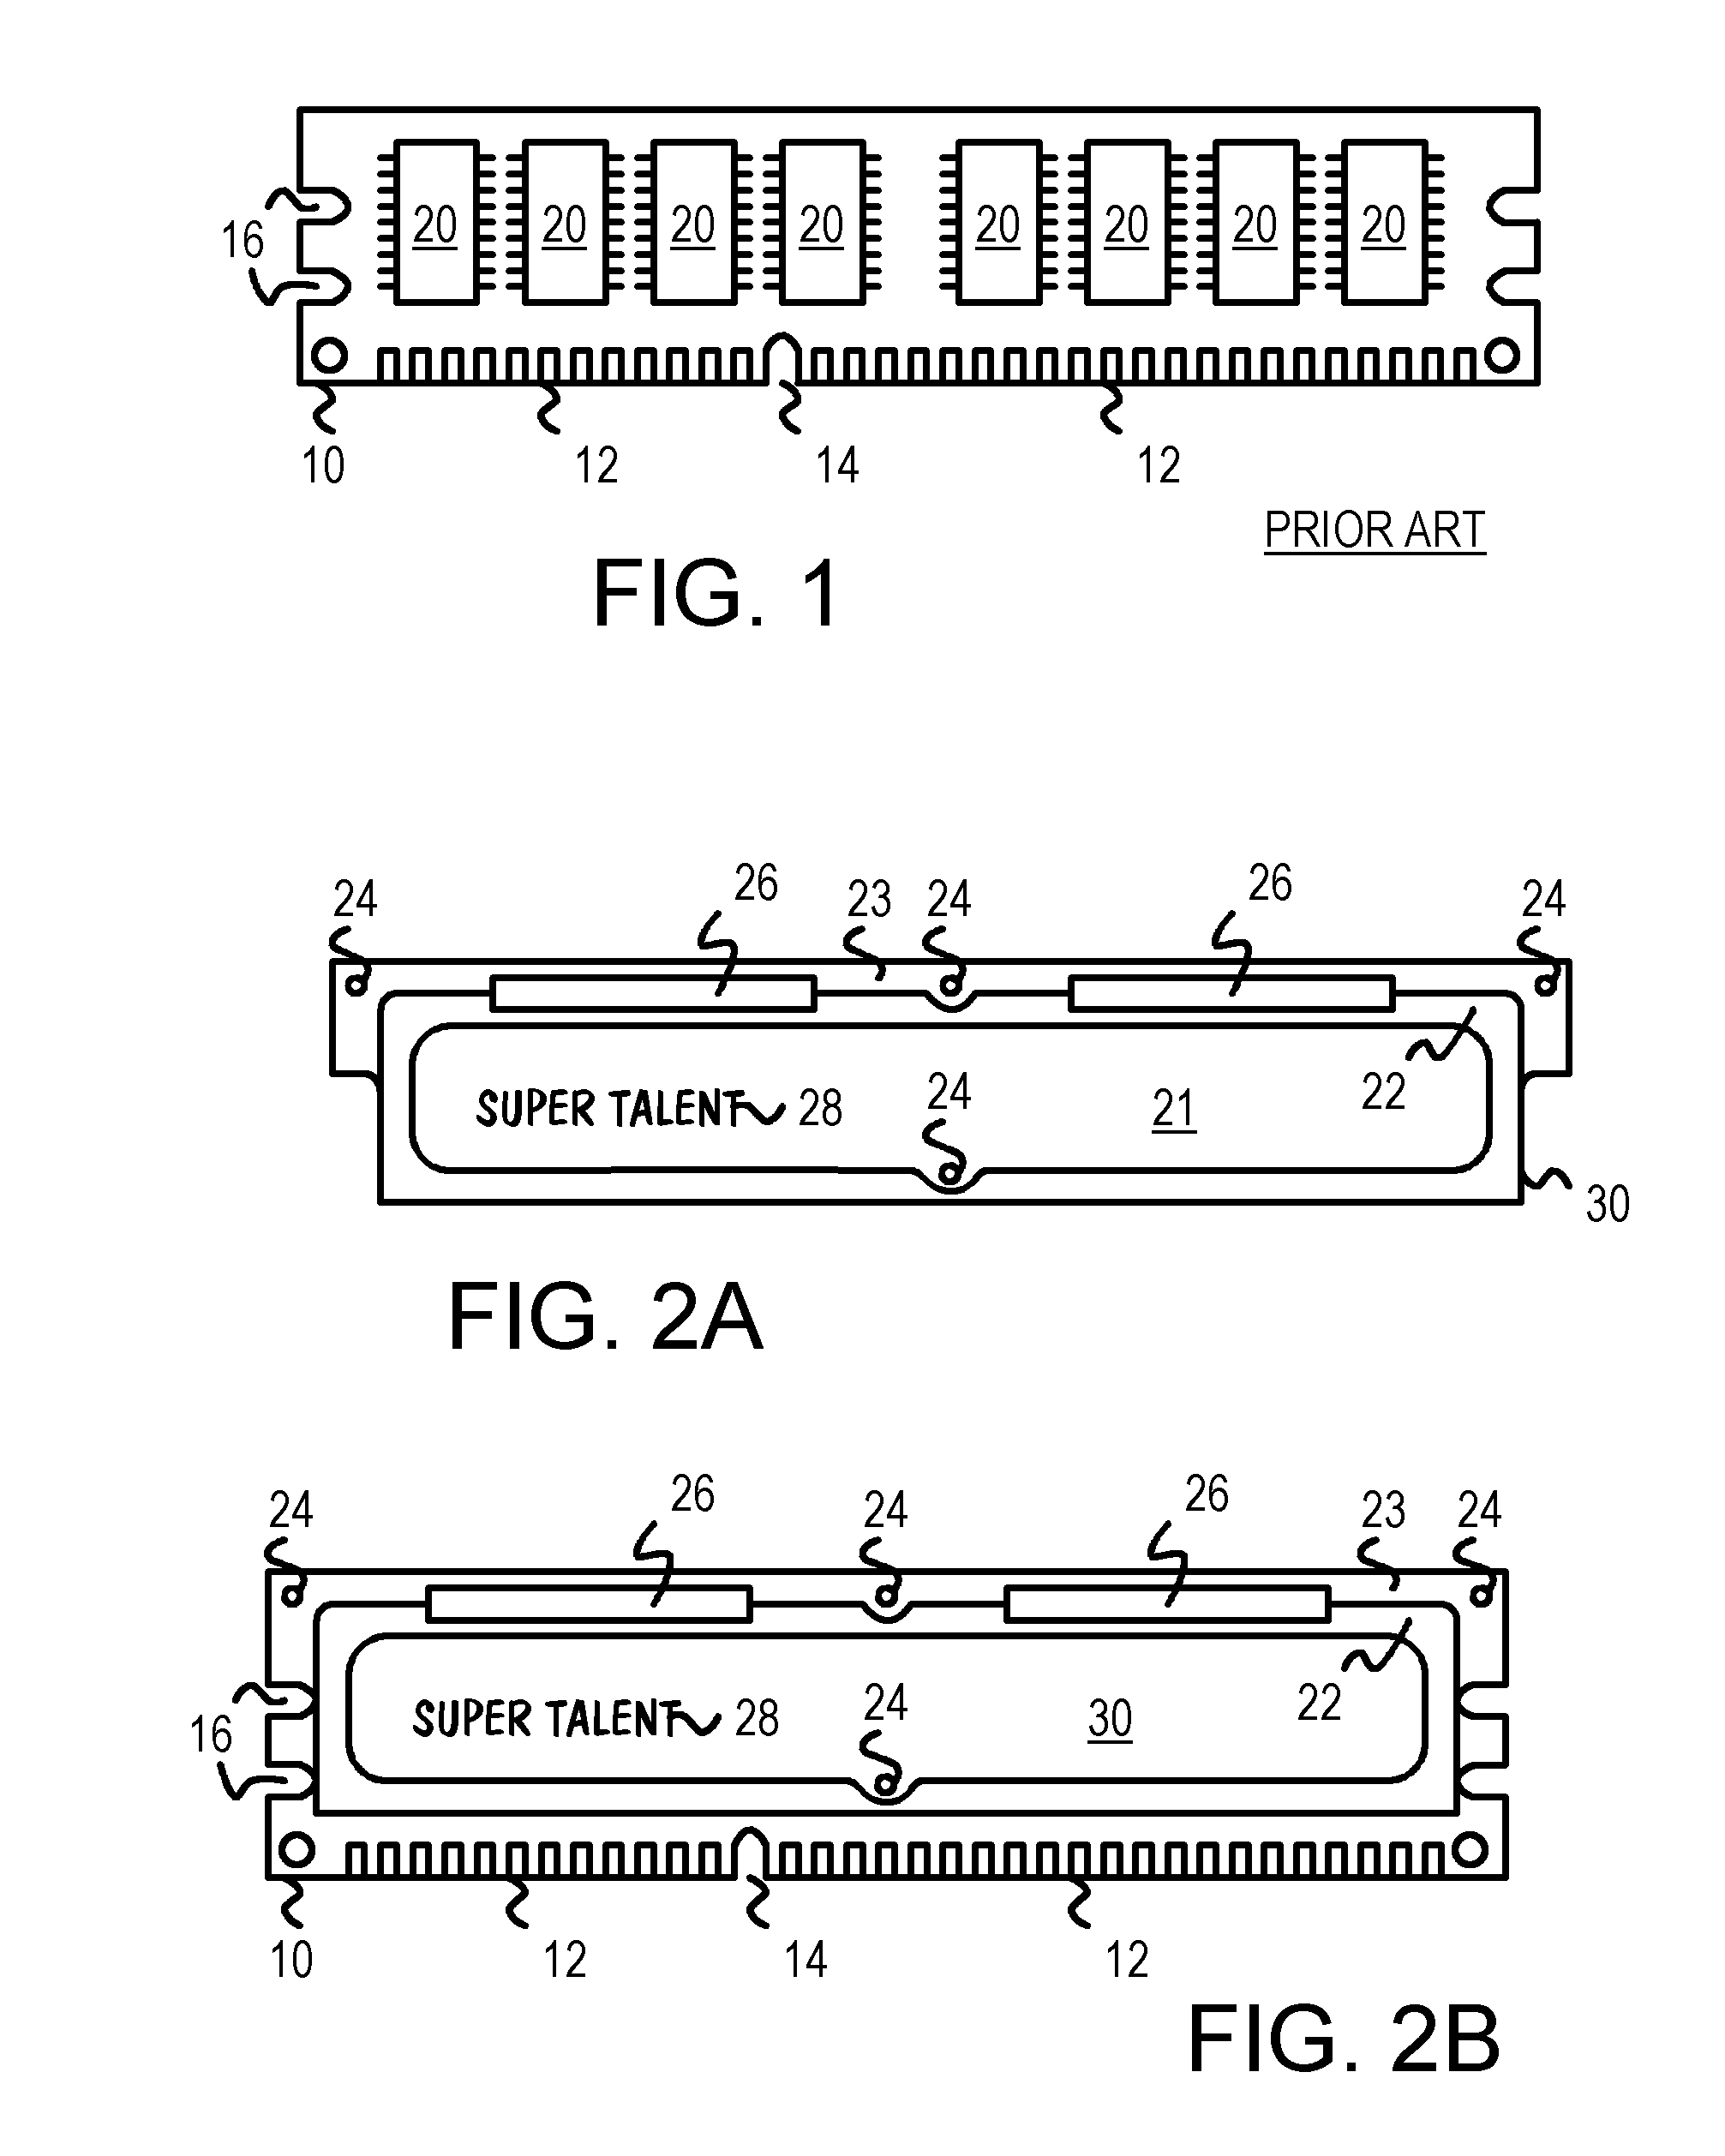 Heat Sink Riveted to Memory Module with Upper Slots and Open Bottom Edge for Air Flow